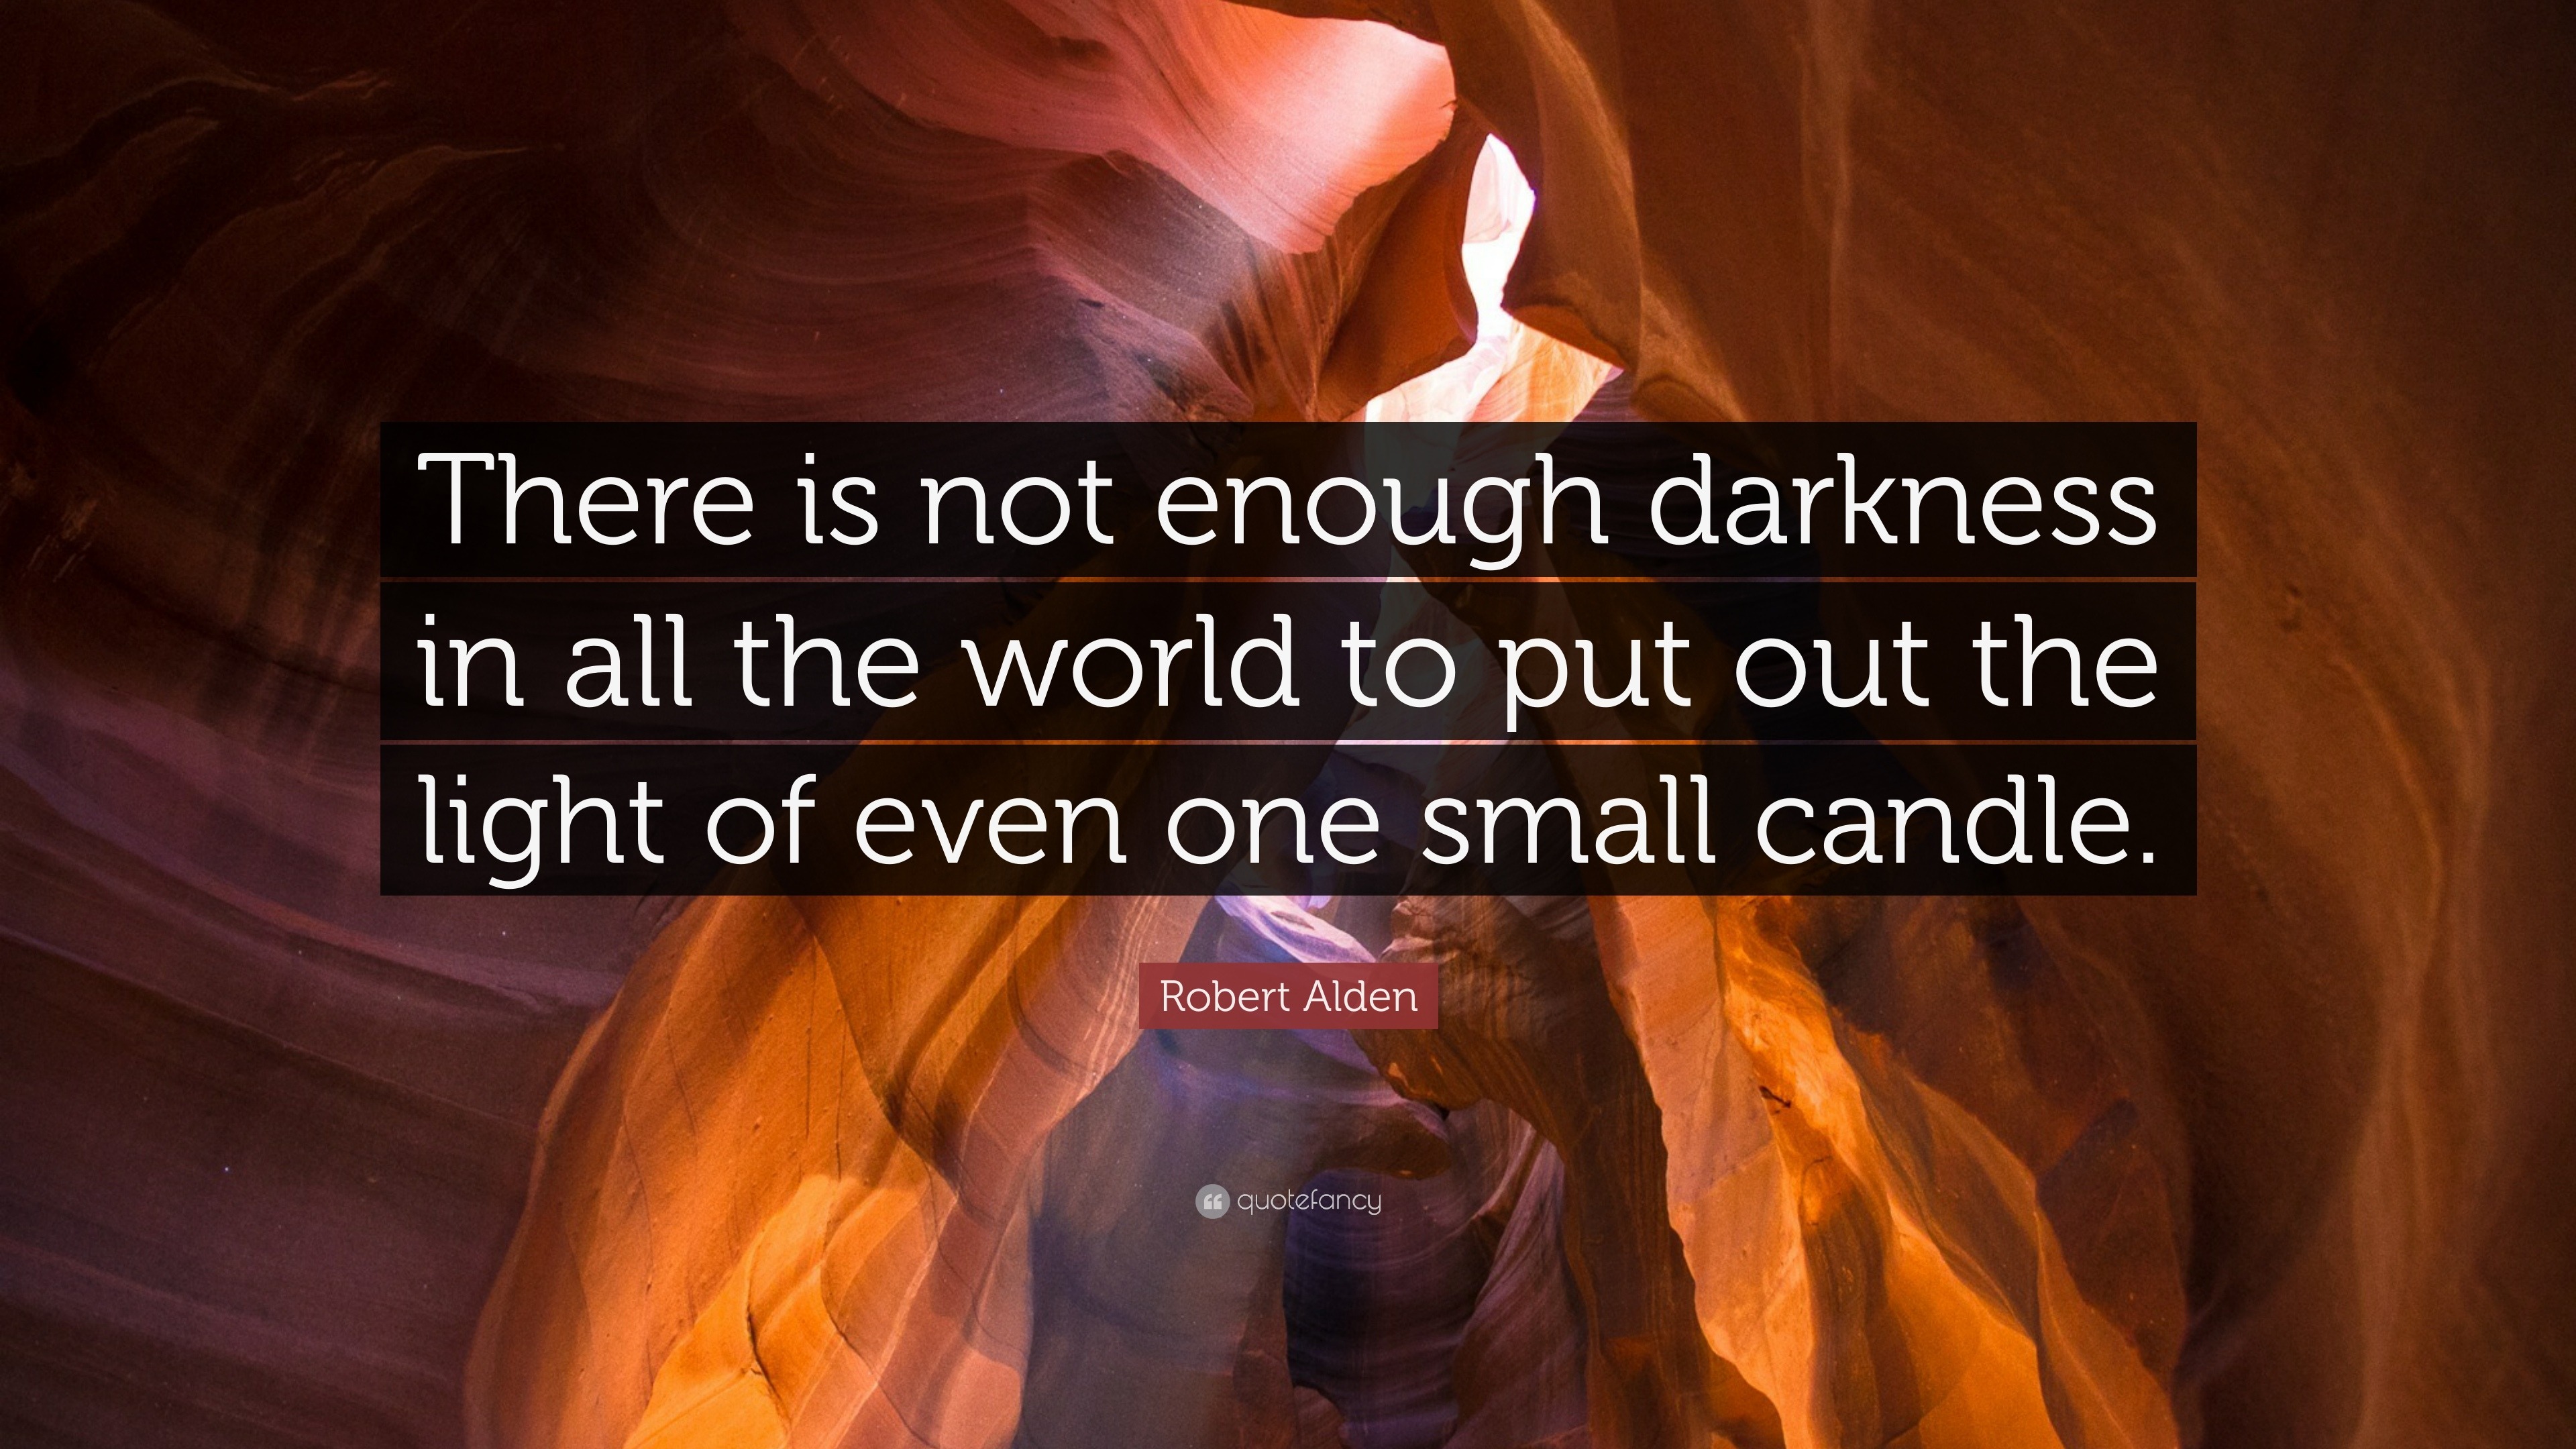 Robert Alden Quote: “There is not enough darkness in all the world to ...